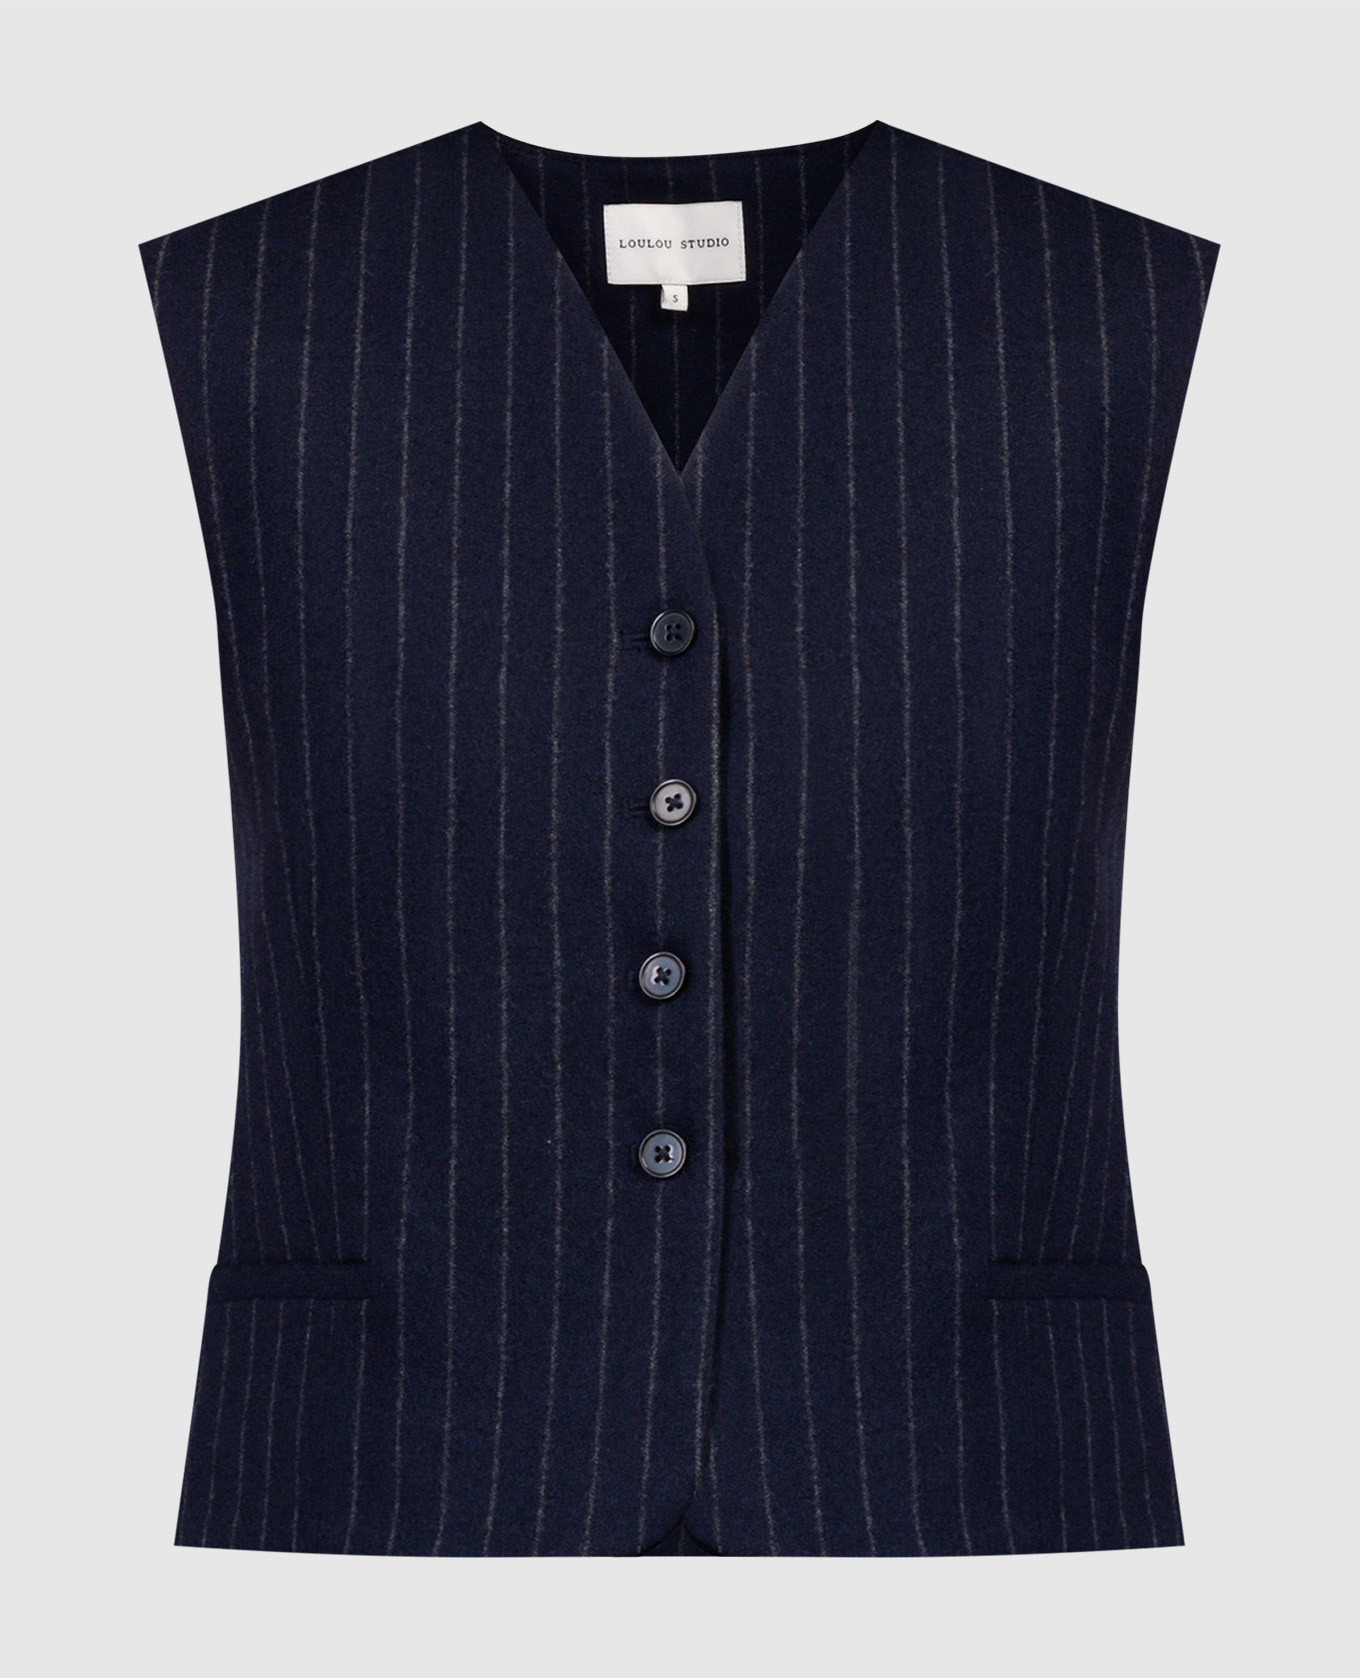 Smith wool and cashmere striped vest in blue